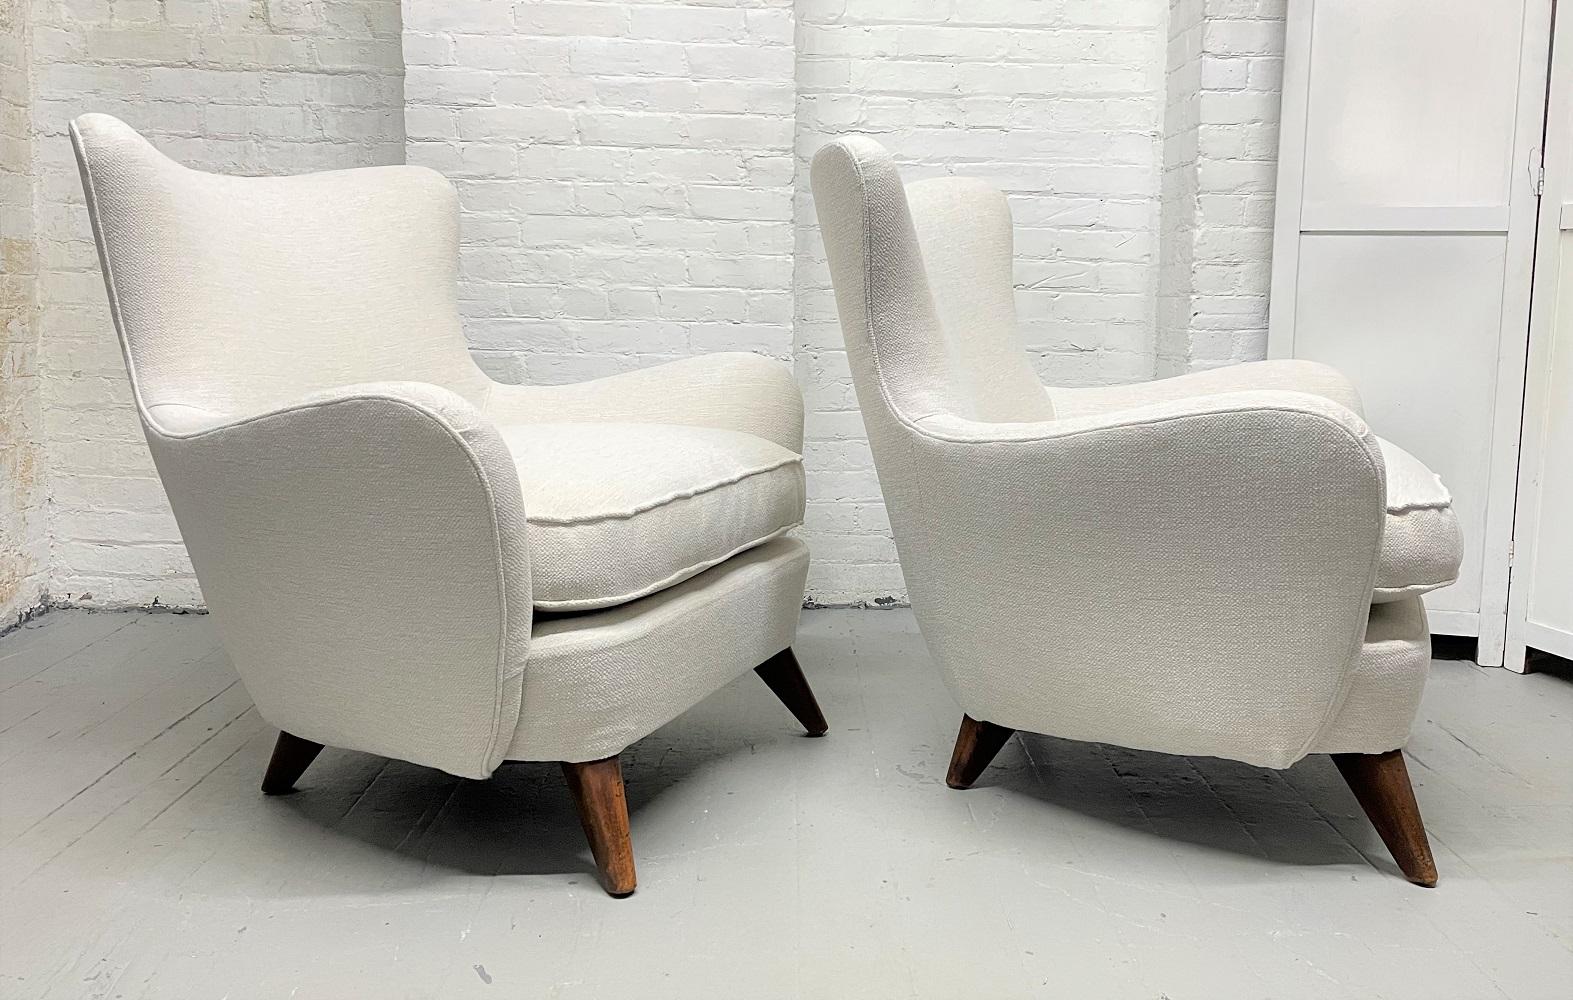 Pair of Ernst Schwadron lounge chairs. Nicely upholstered chairs with curved arms and solid wooden legs.